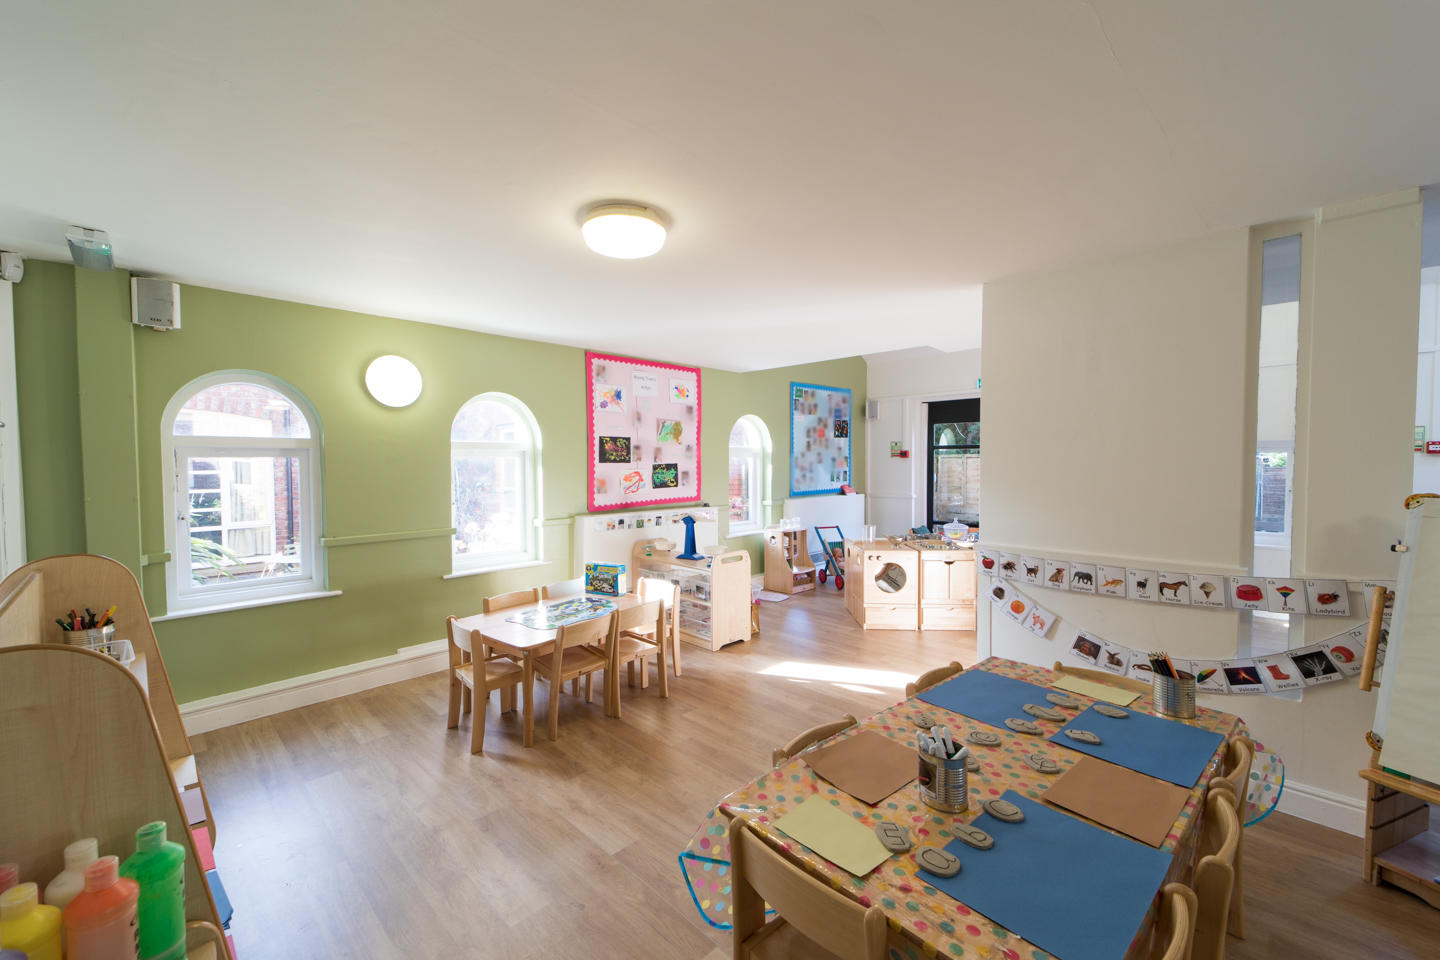 Bright Horizons Clairmont Day Nursery and Preschool Wilmslow 03333 558155